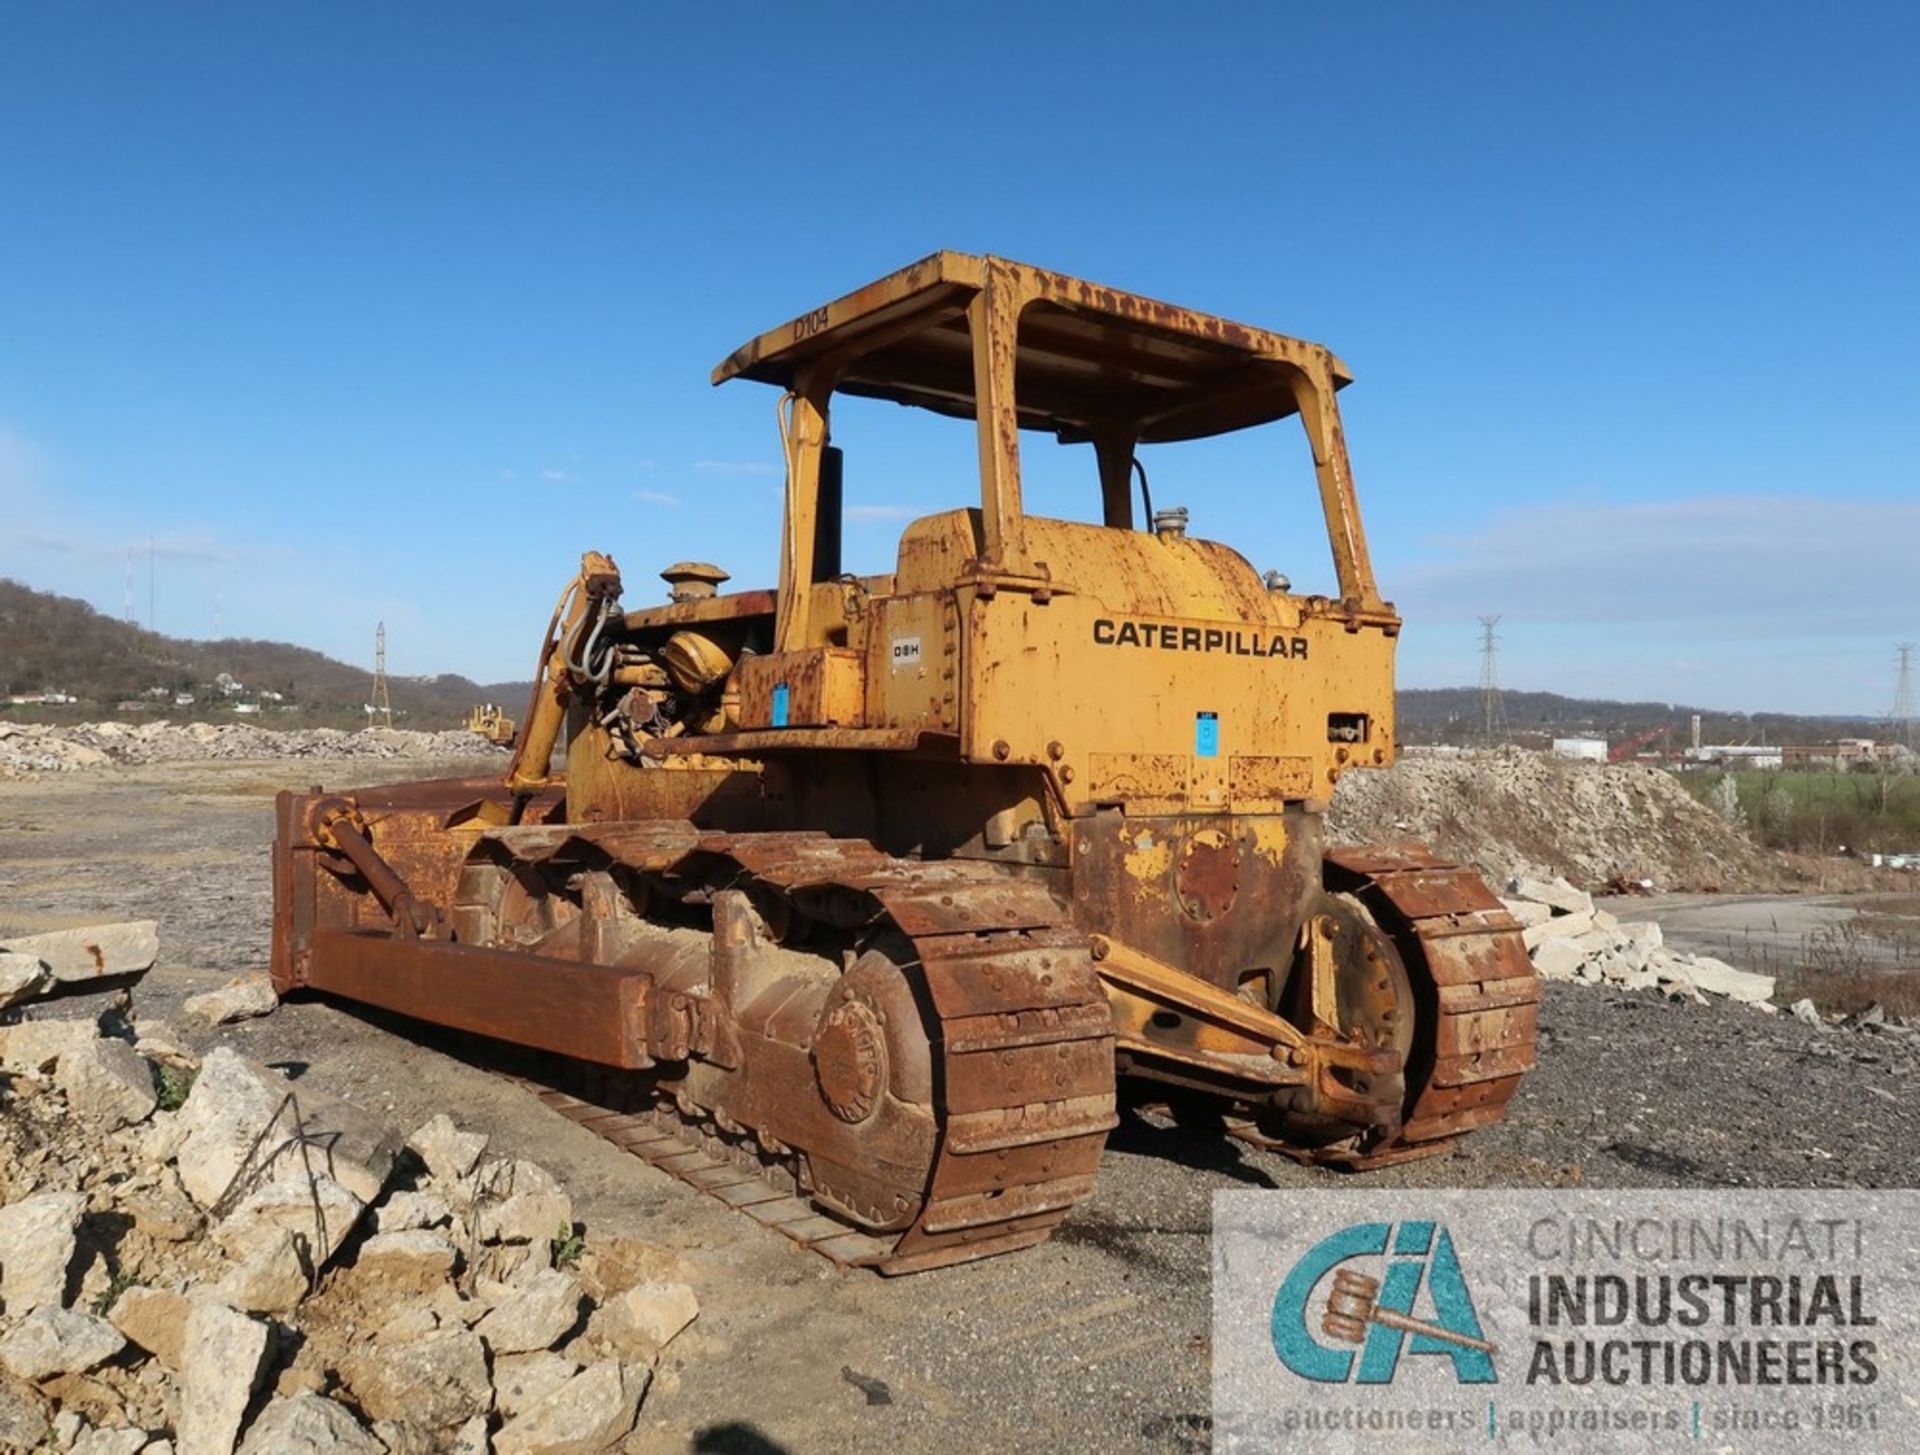 CATERPILLAR MODEL D8H CRAWLER DOZIER; S/N 46A28203 (NEW 1973), 53" X 148" BLADE, 24" TRACKS, HOURS - Image 4 of 18